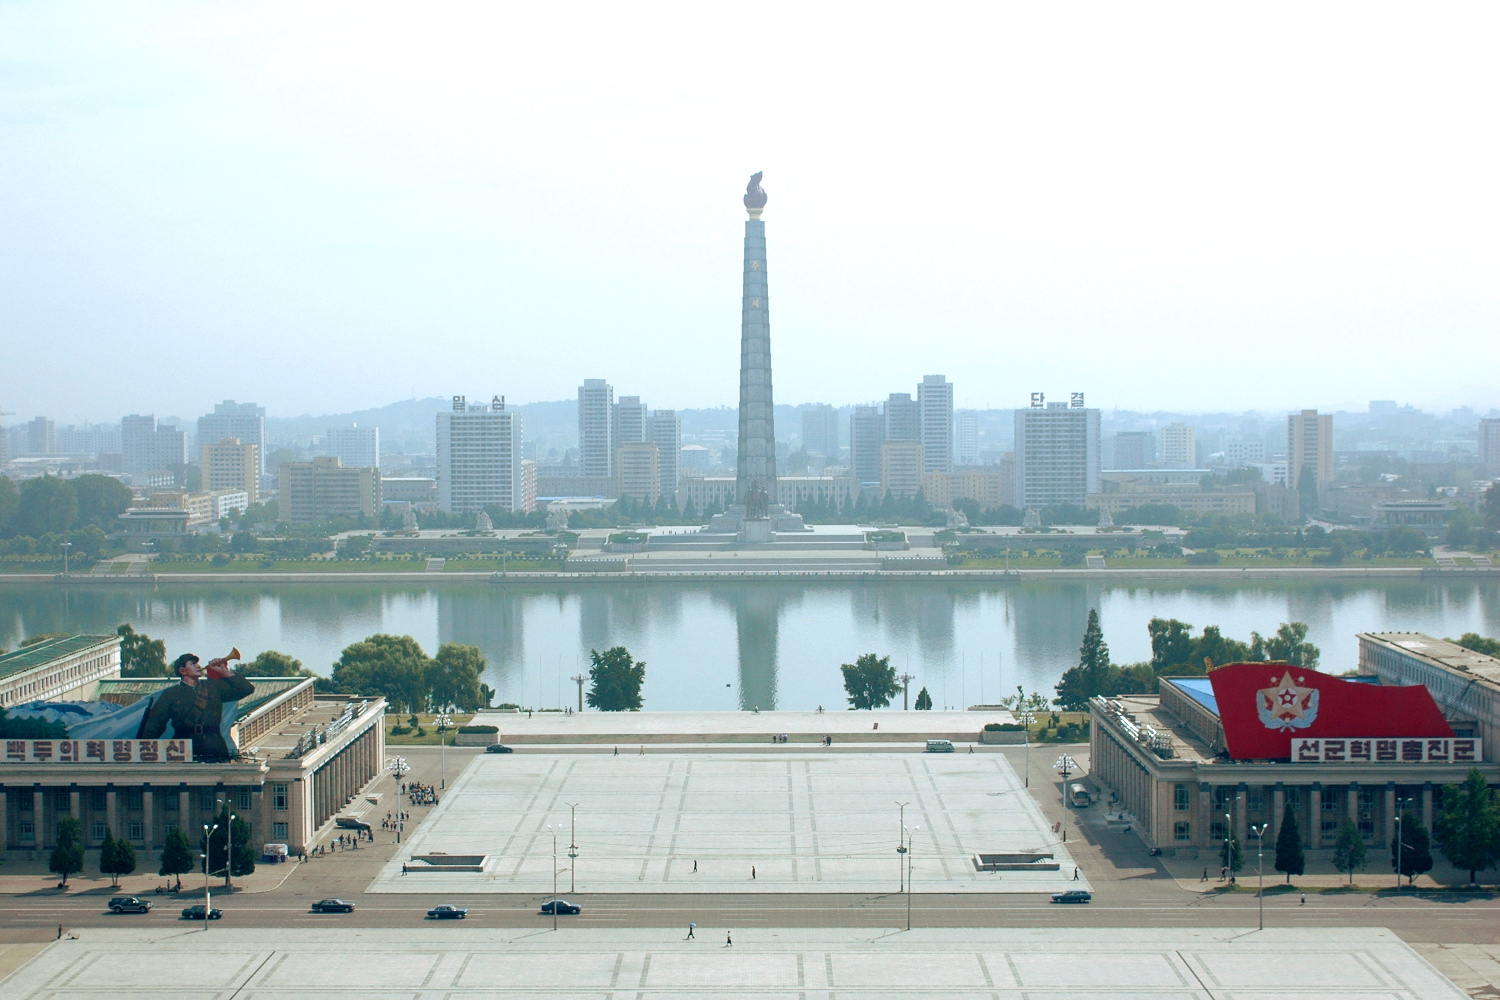 A typical stop on a North Korean tour: Kim Il Sung Sq and the Tower of the Juche Idea. Image by Lonely Planet